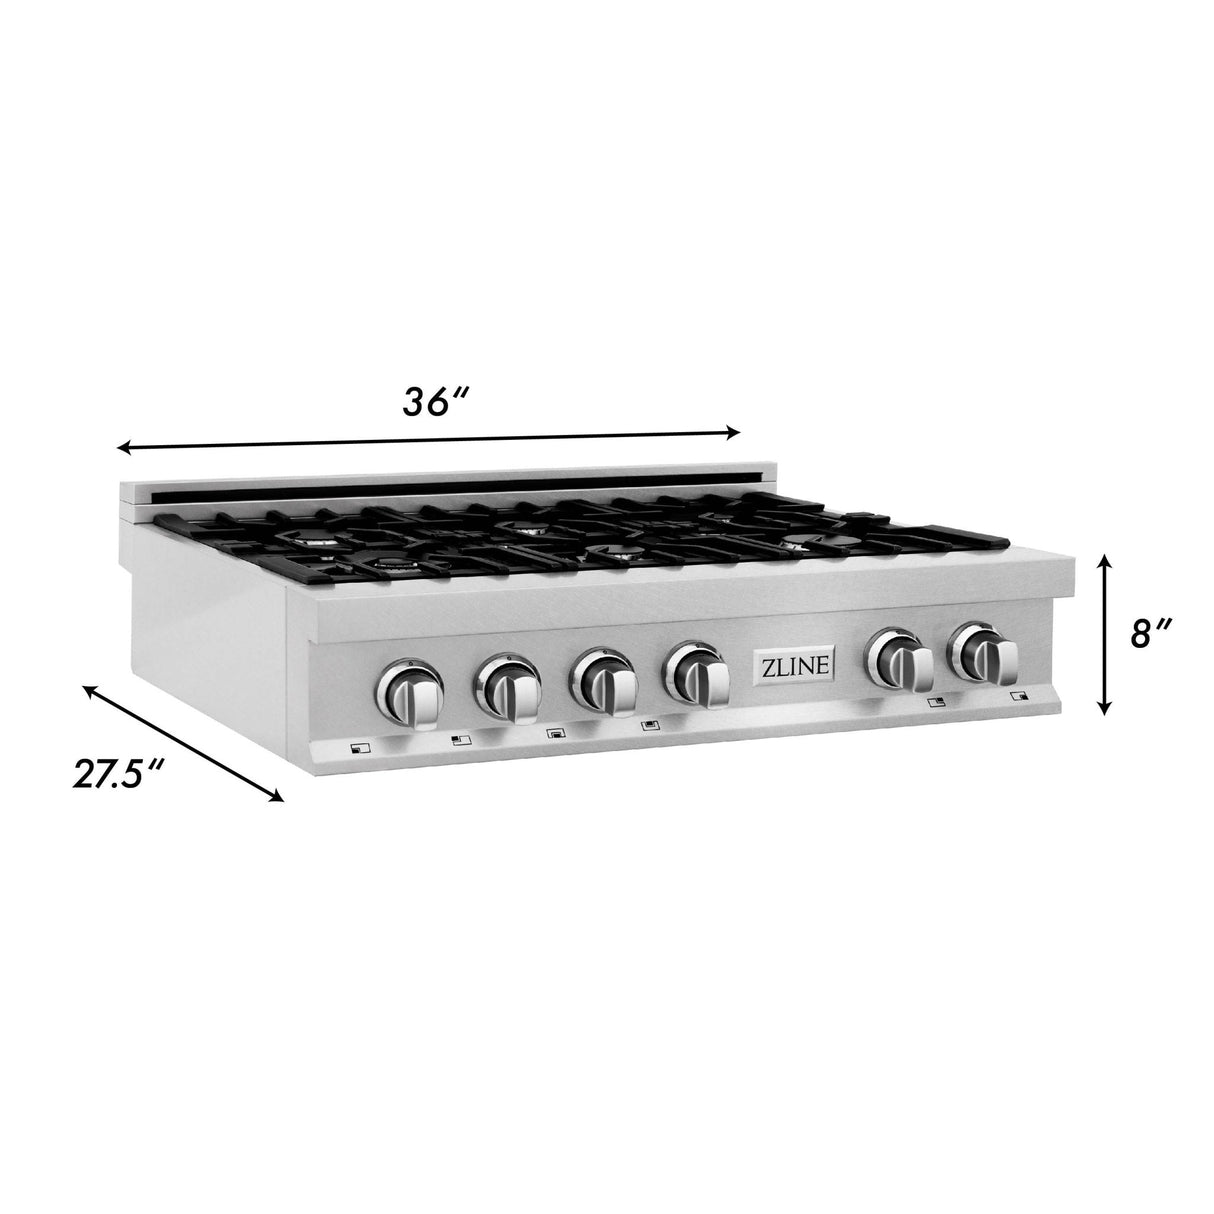 ZLINE 36 in. Porcelain Rangetop in DuraSnow® Stainless Steel with 6 Gas Burners (RTS-36)